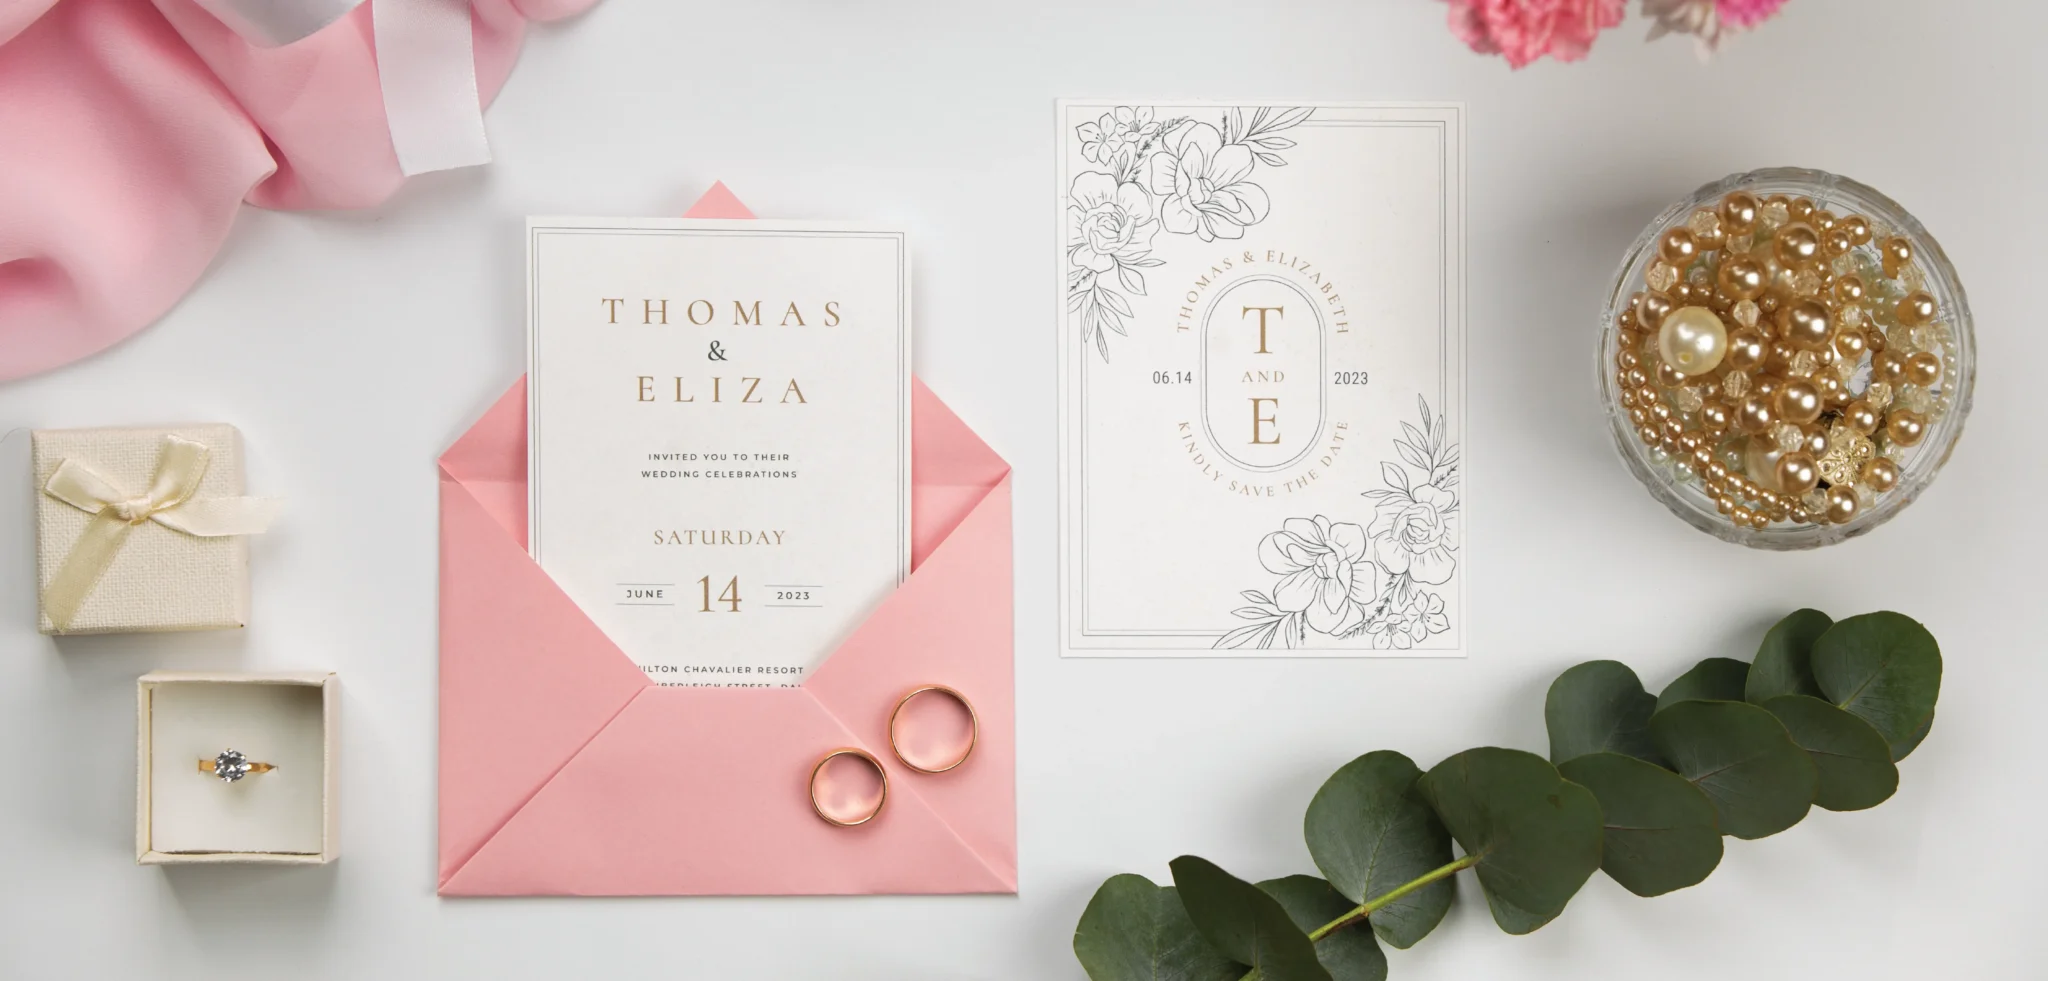 A wedding invitation with floral illustrations in a pink envelope